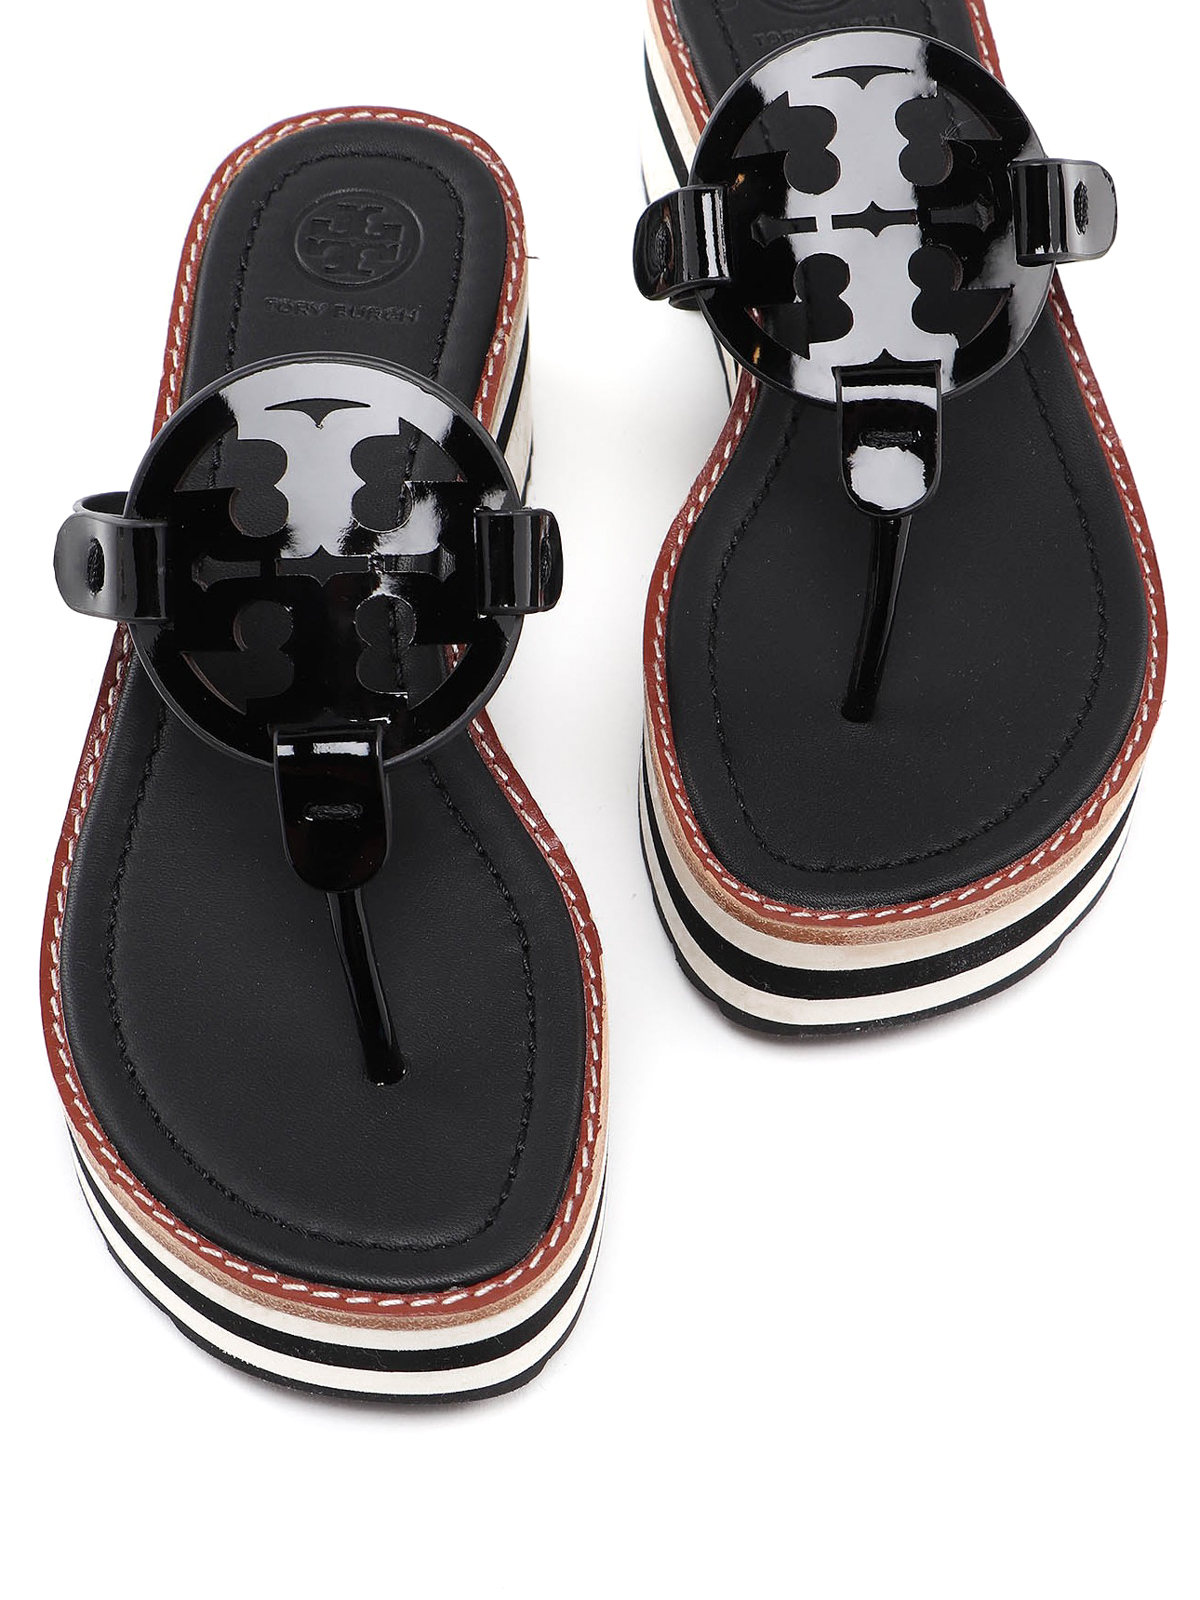 Tory Burch Sandals Thong Hot Sale, UP TO 68% OFF | www.ldeventos.com